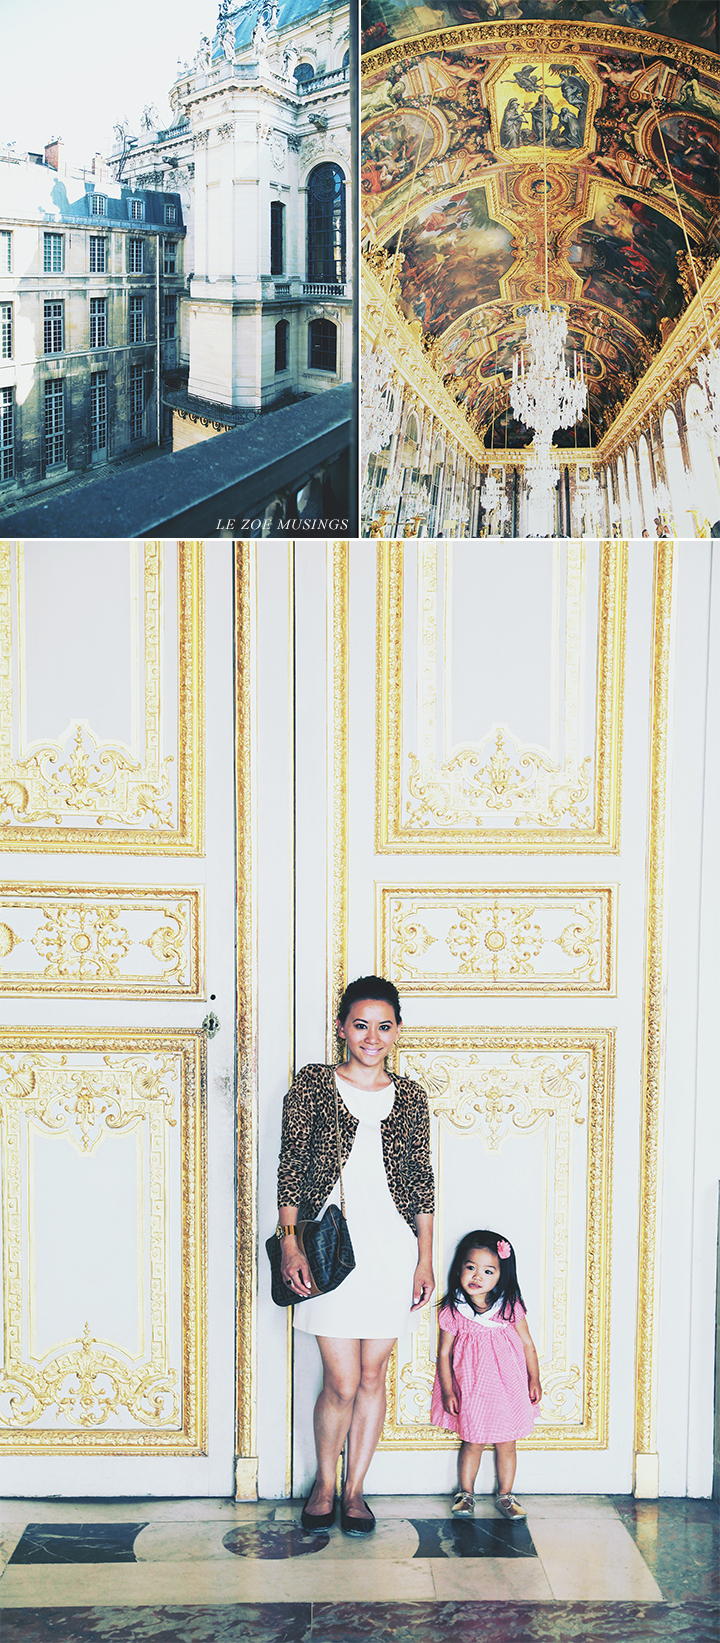 Palace of Versailles by Le Zoe Musings